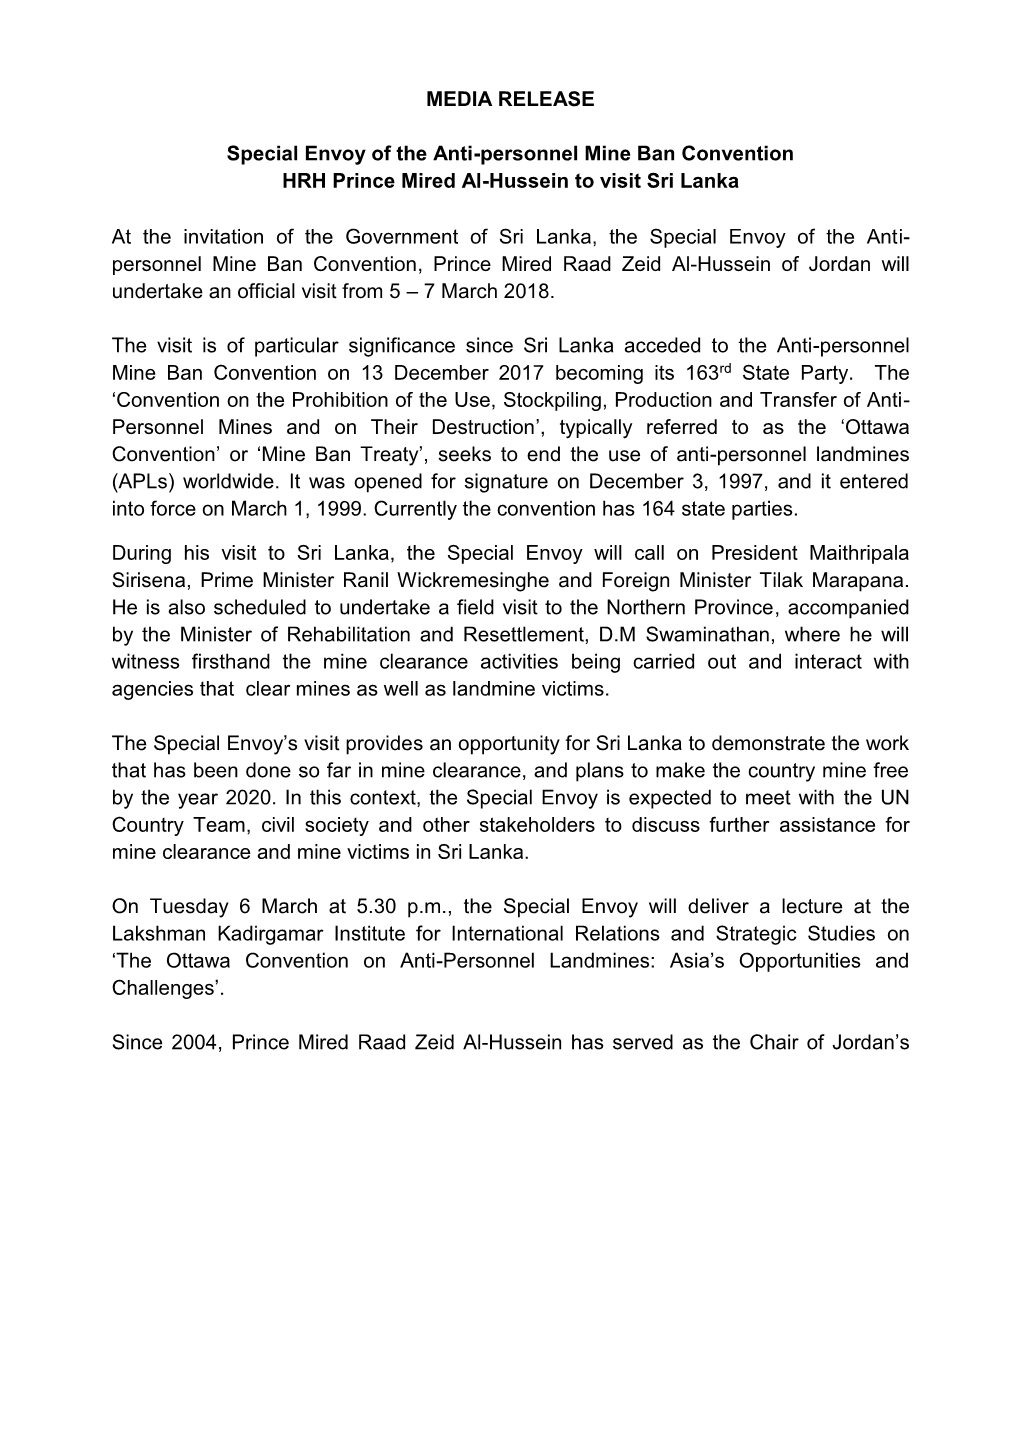 MEDIA RELEASE Special Envoy of the Anti-Personnel Mine Ban